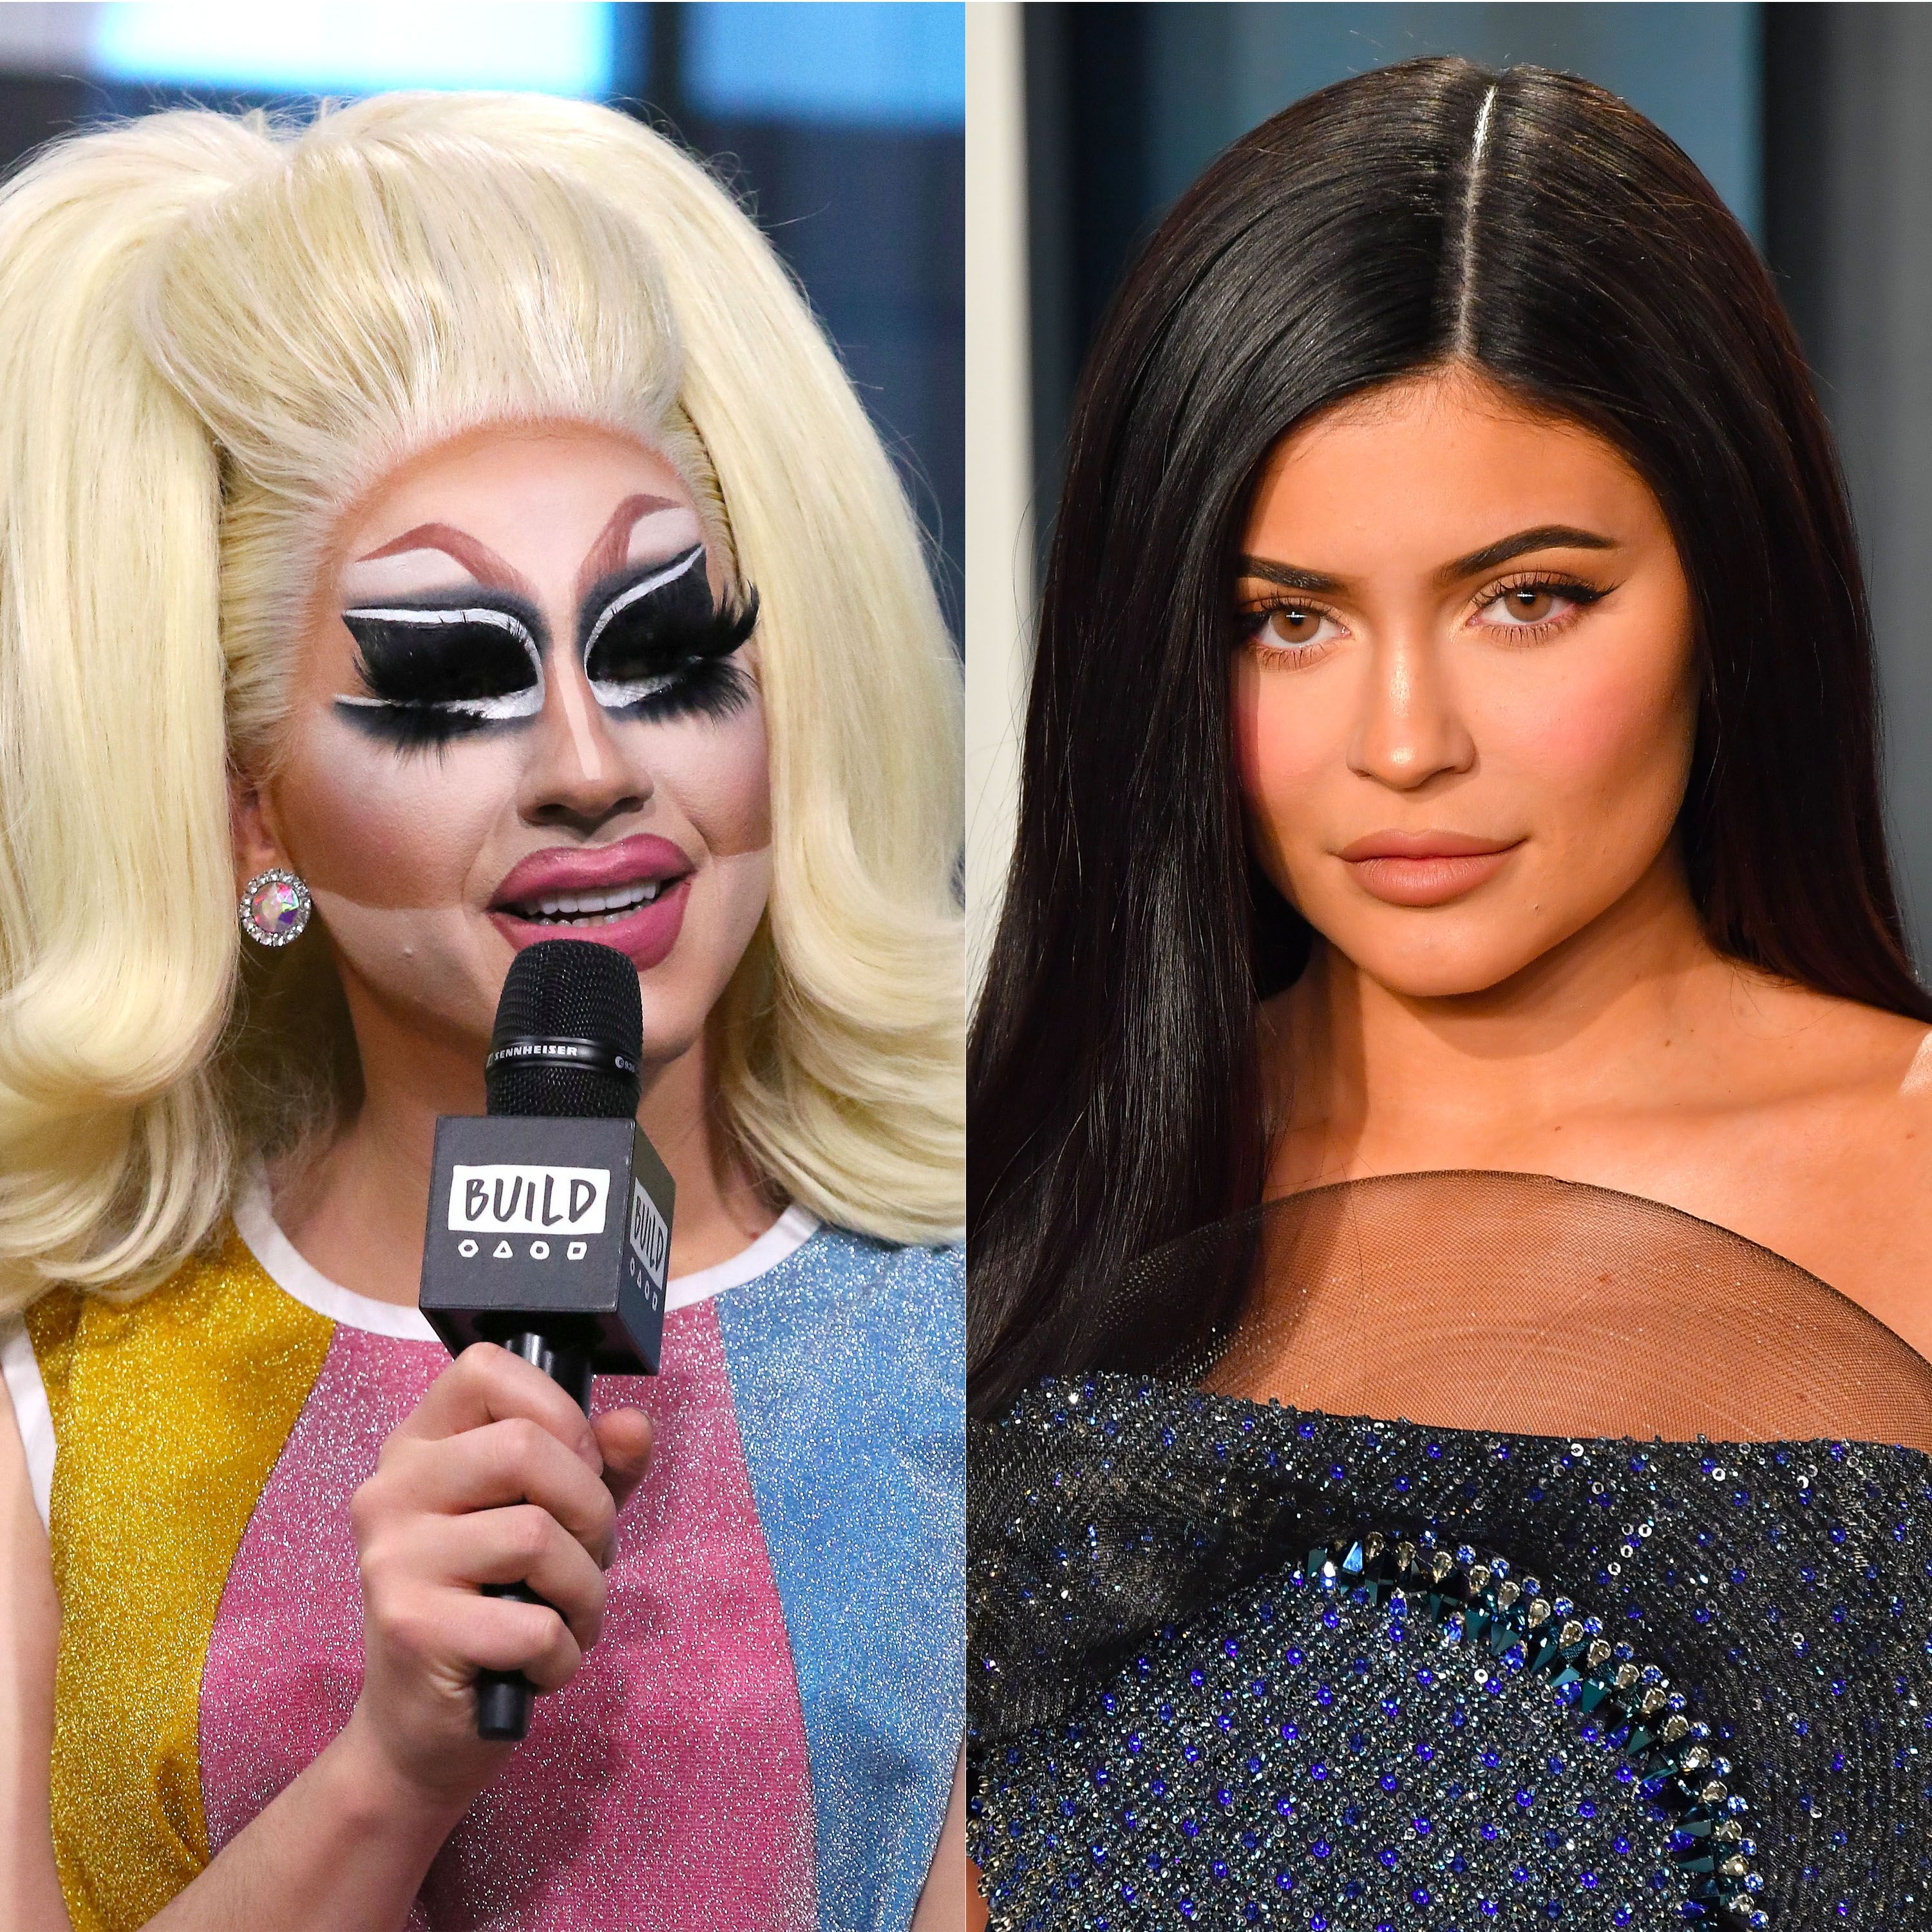 Trixie Mattel responds to claims that Kylie Jenner copied her lip gloss packaging